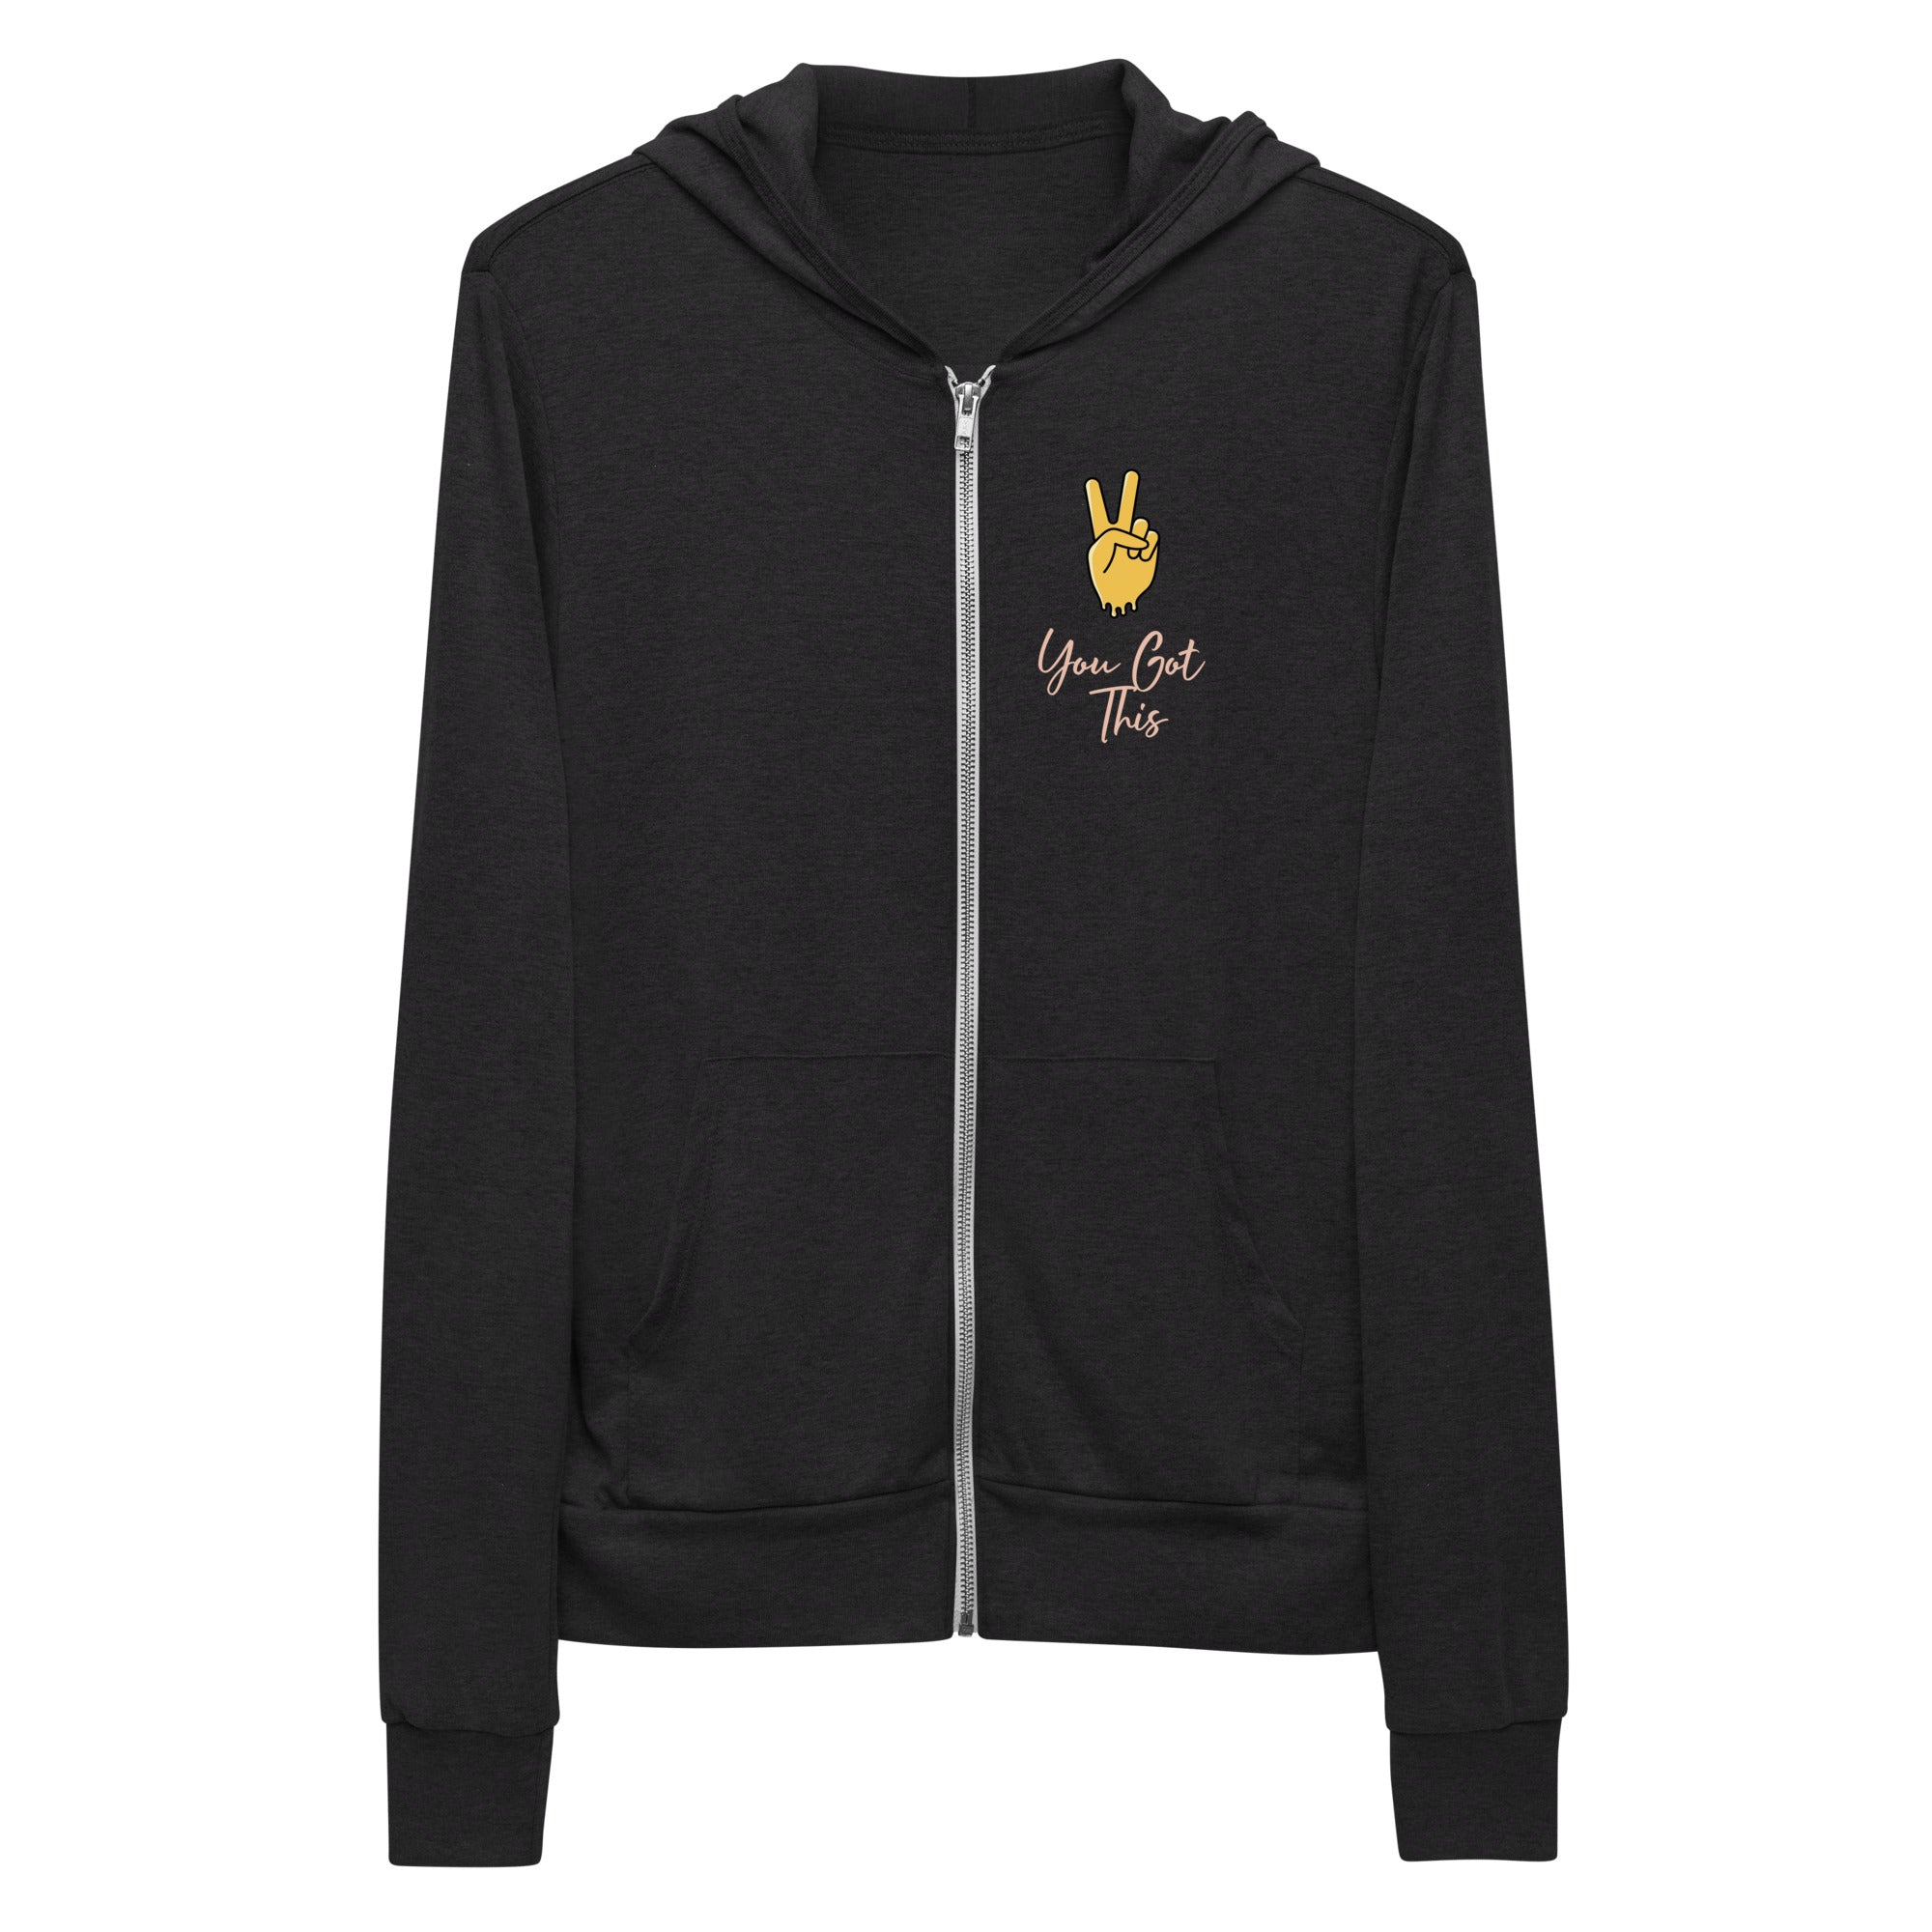 You Got This, Unisex light zip hoodie | Positive Affirmation Clothing